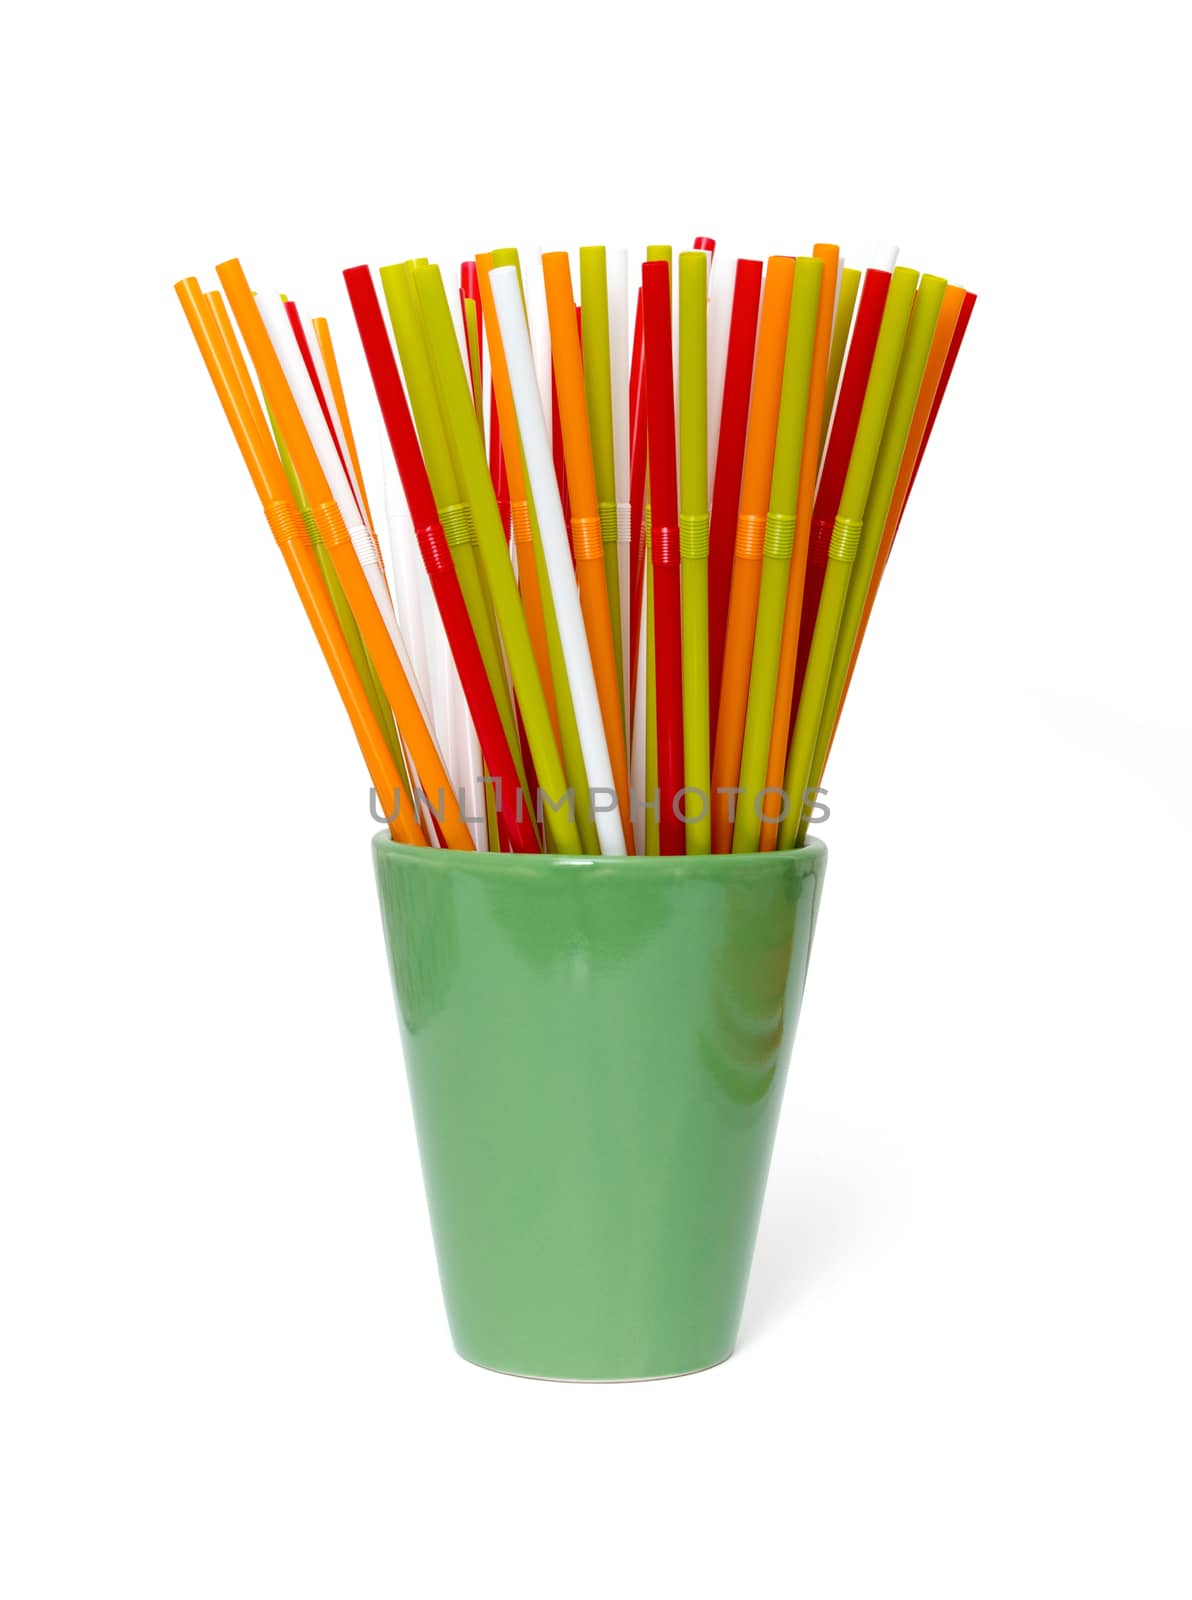 Straws for drinks in the glass. The photo on white background by DNKSTUDIO